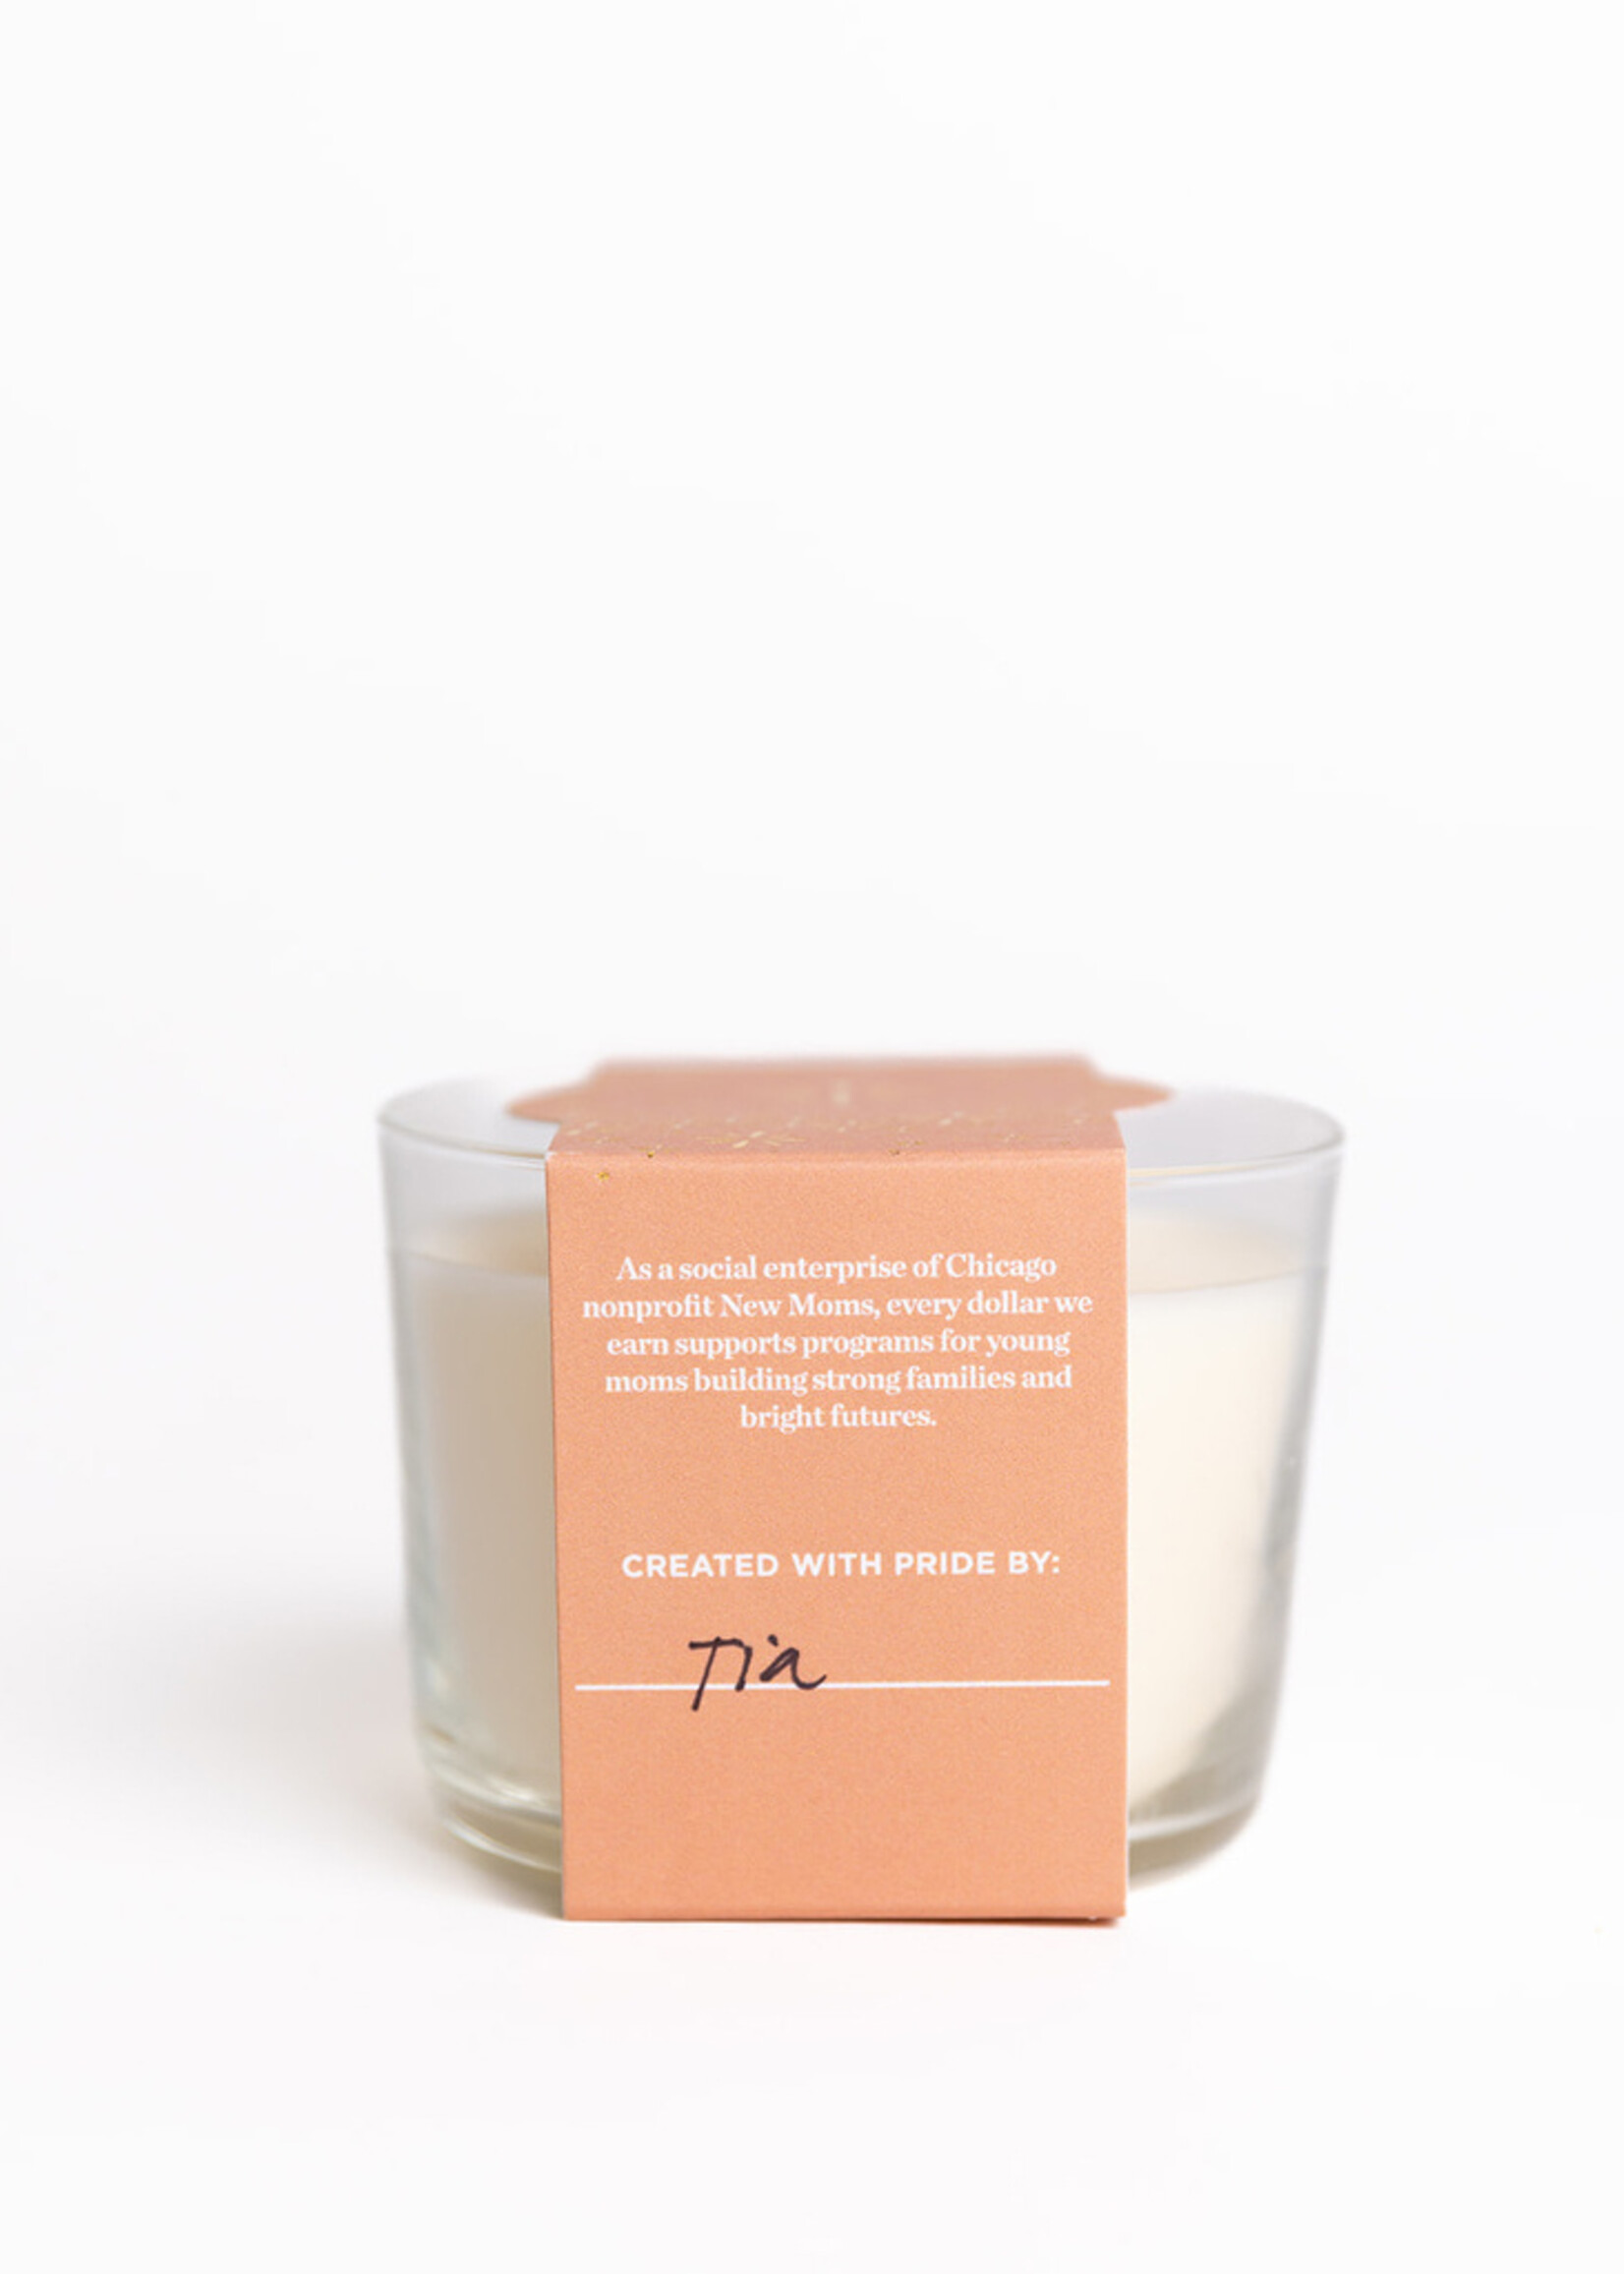 Bright Endeavors Cardamom & Clove Soy Candle